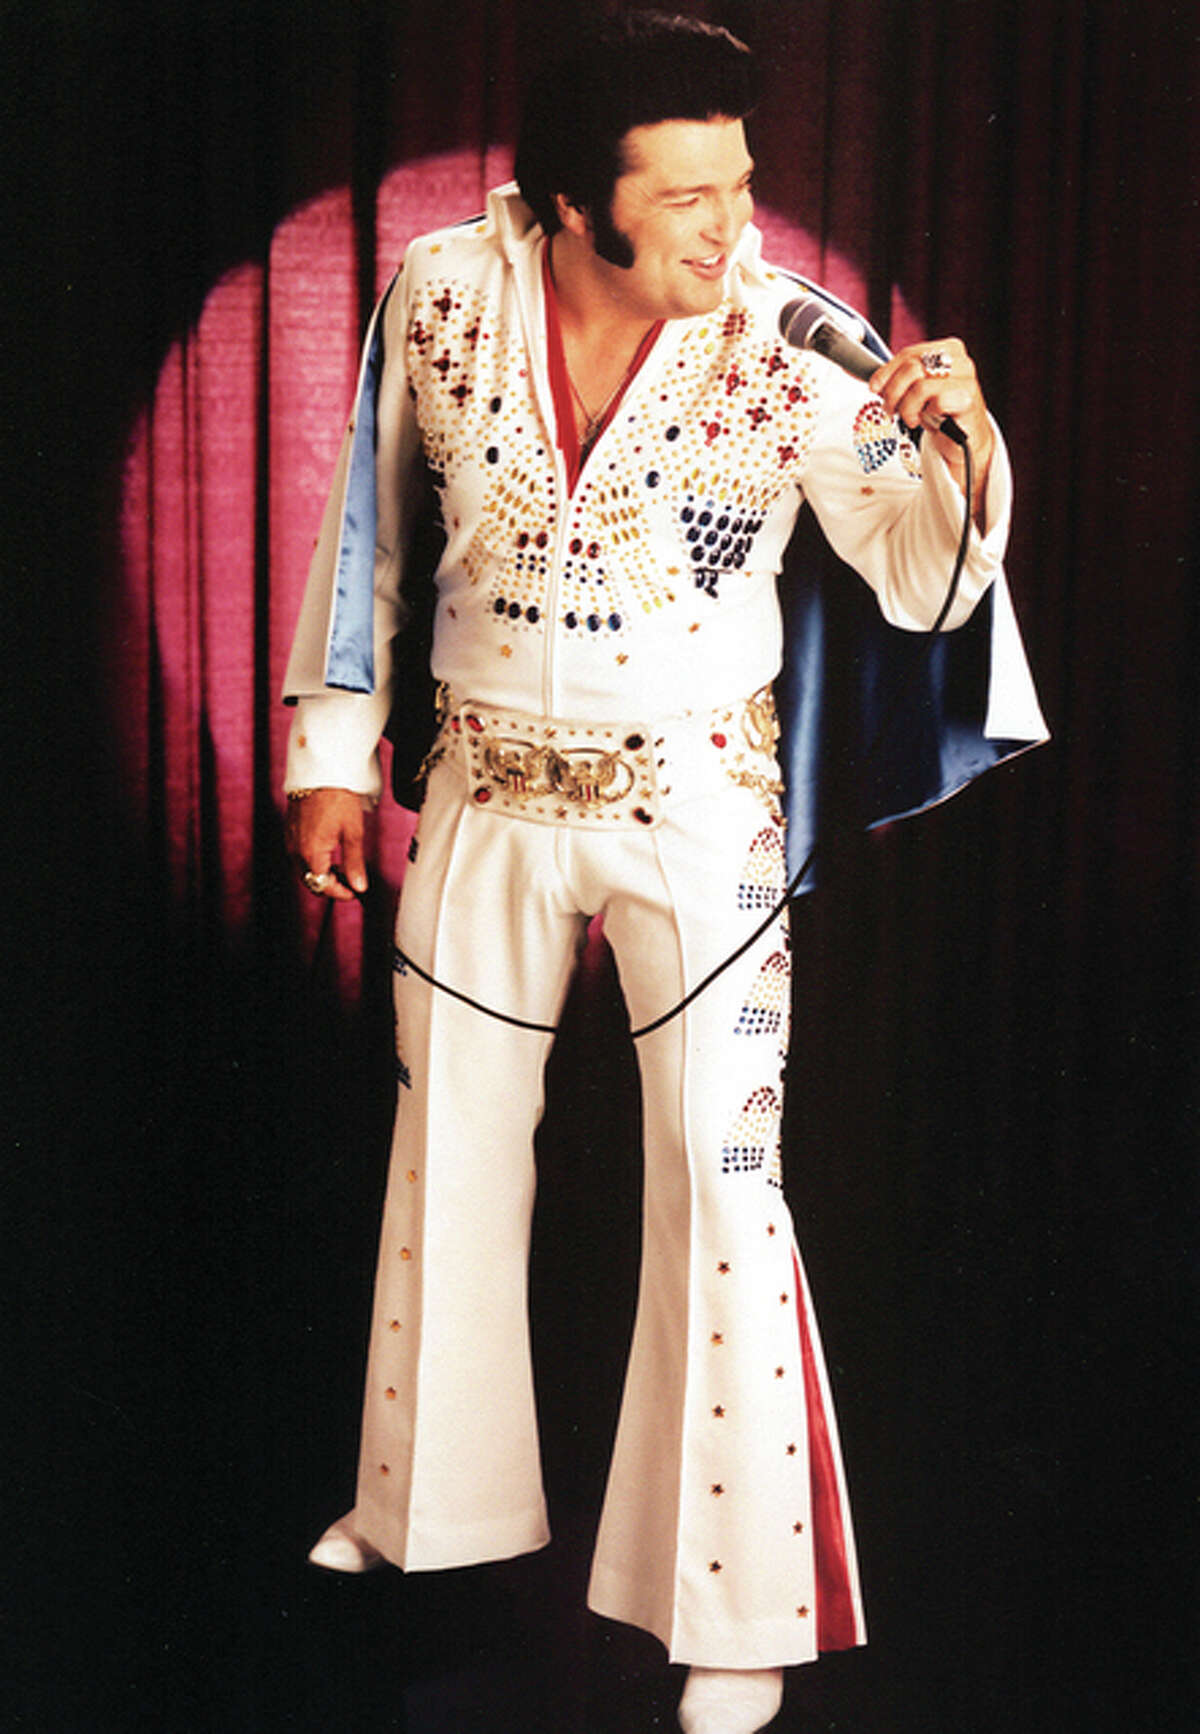 Steve “Elvis” Davis has portrayed “The King” for nearly 30 years, averaging more than 400 shows annually. Extensive research and close attention to detail are hallmarks of his performances.